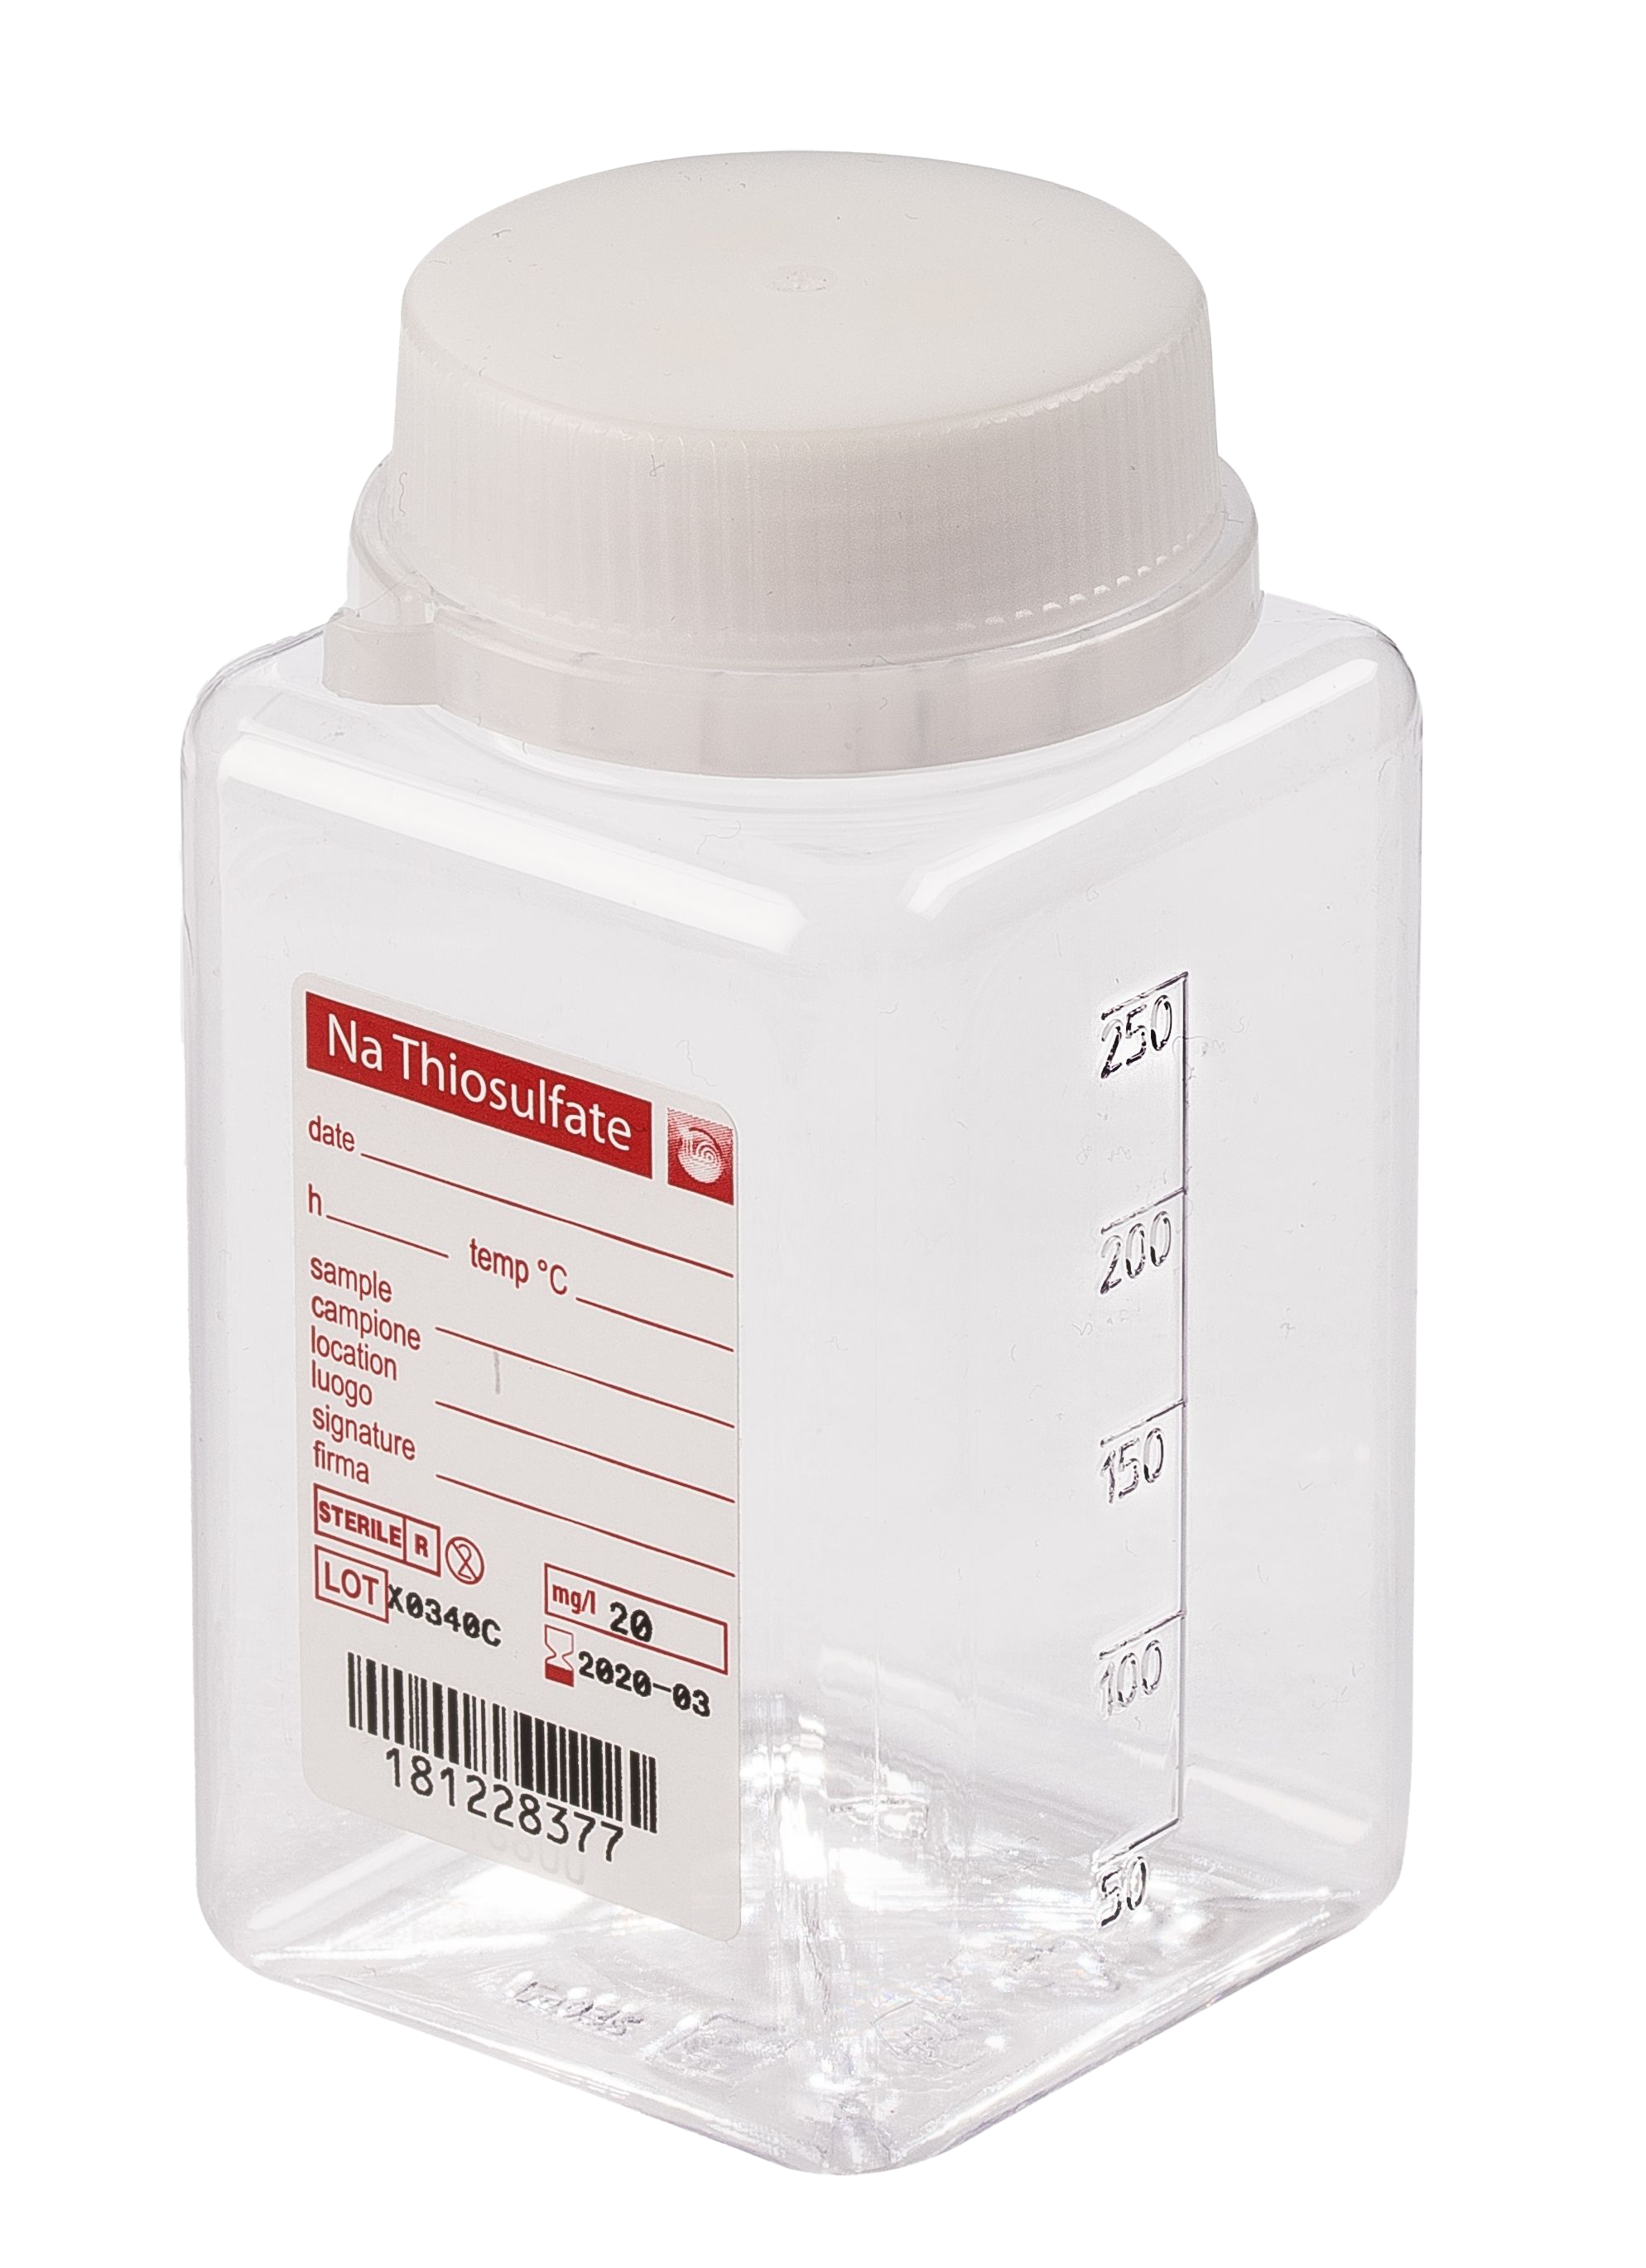 sterile Weithalsflasche mit 5 mg Natriumthiosulfat, 250 ml, PET-G, VE 216 St.